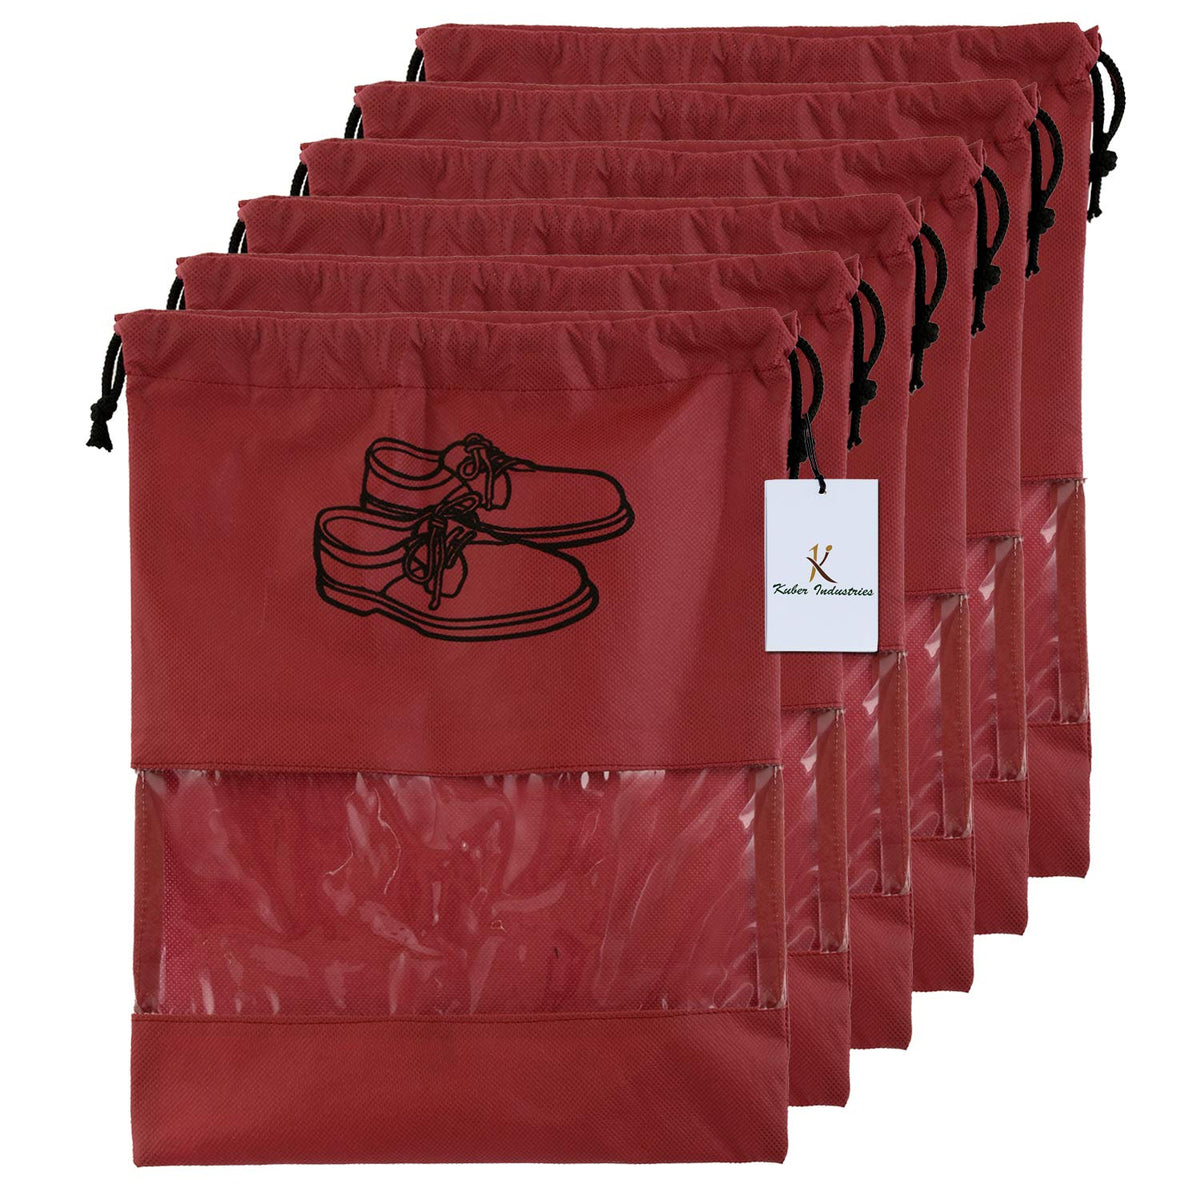 Kuber Industries Shoe Cover/String Bag Organizer|Shoe Print & Non Woven Material|Transparent Window|Size 43 x 30 Cm, Pack of 6 (Maroon)-CTMTC039494